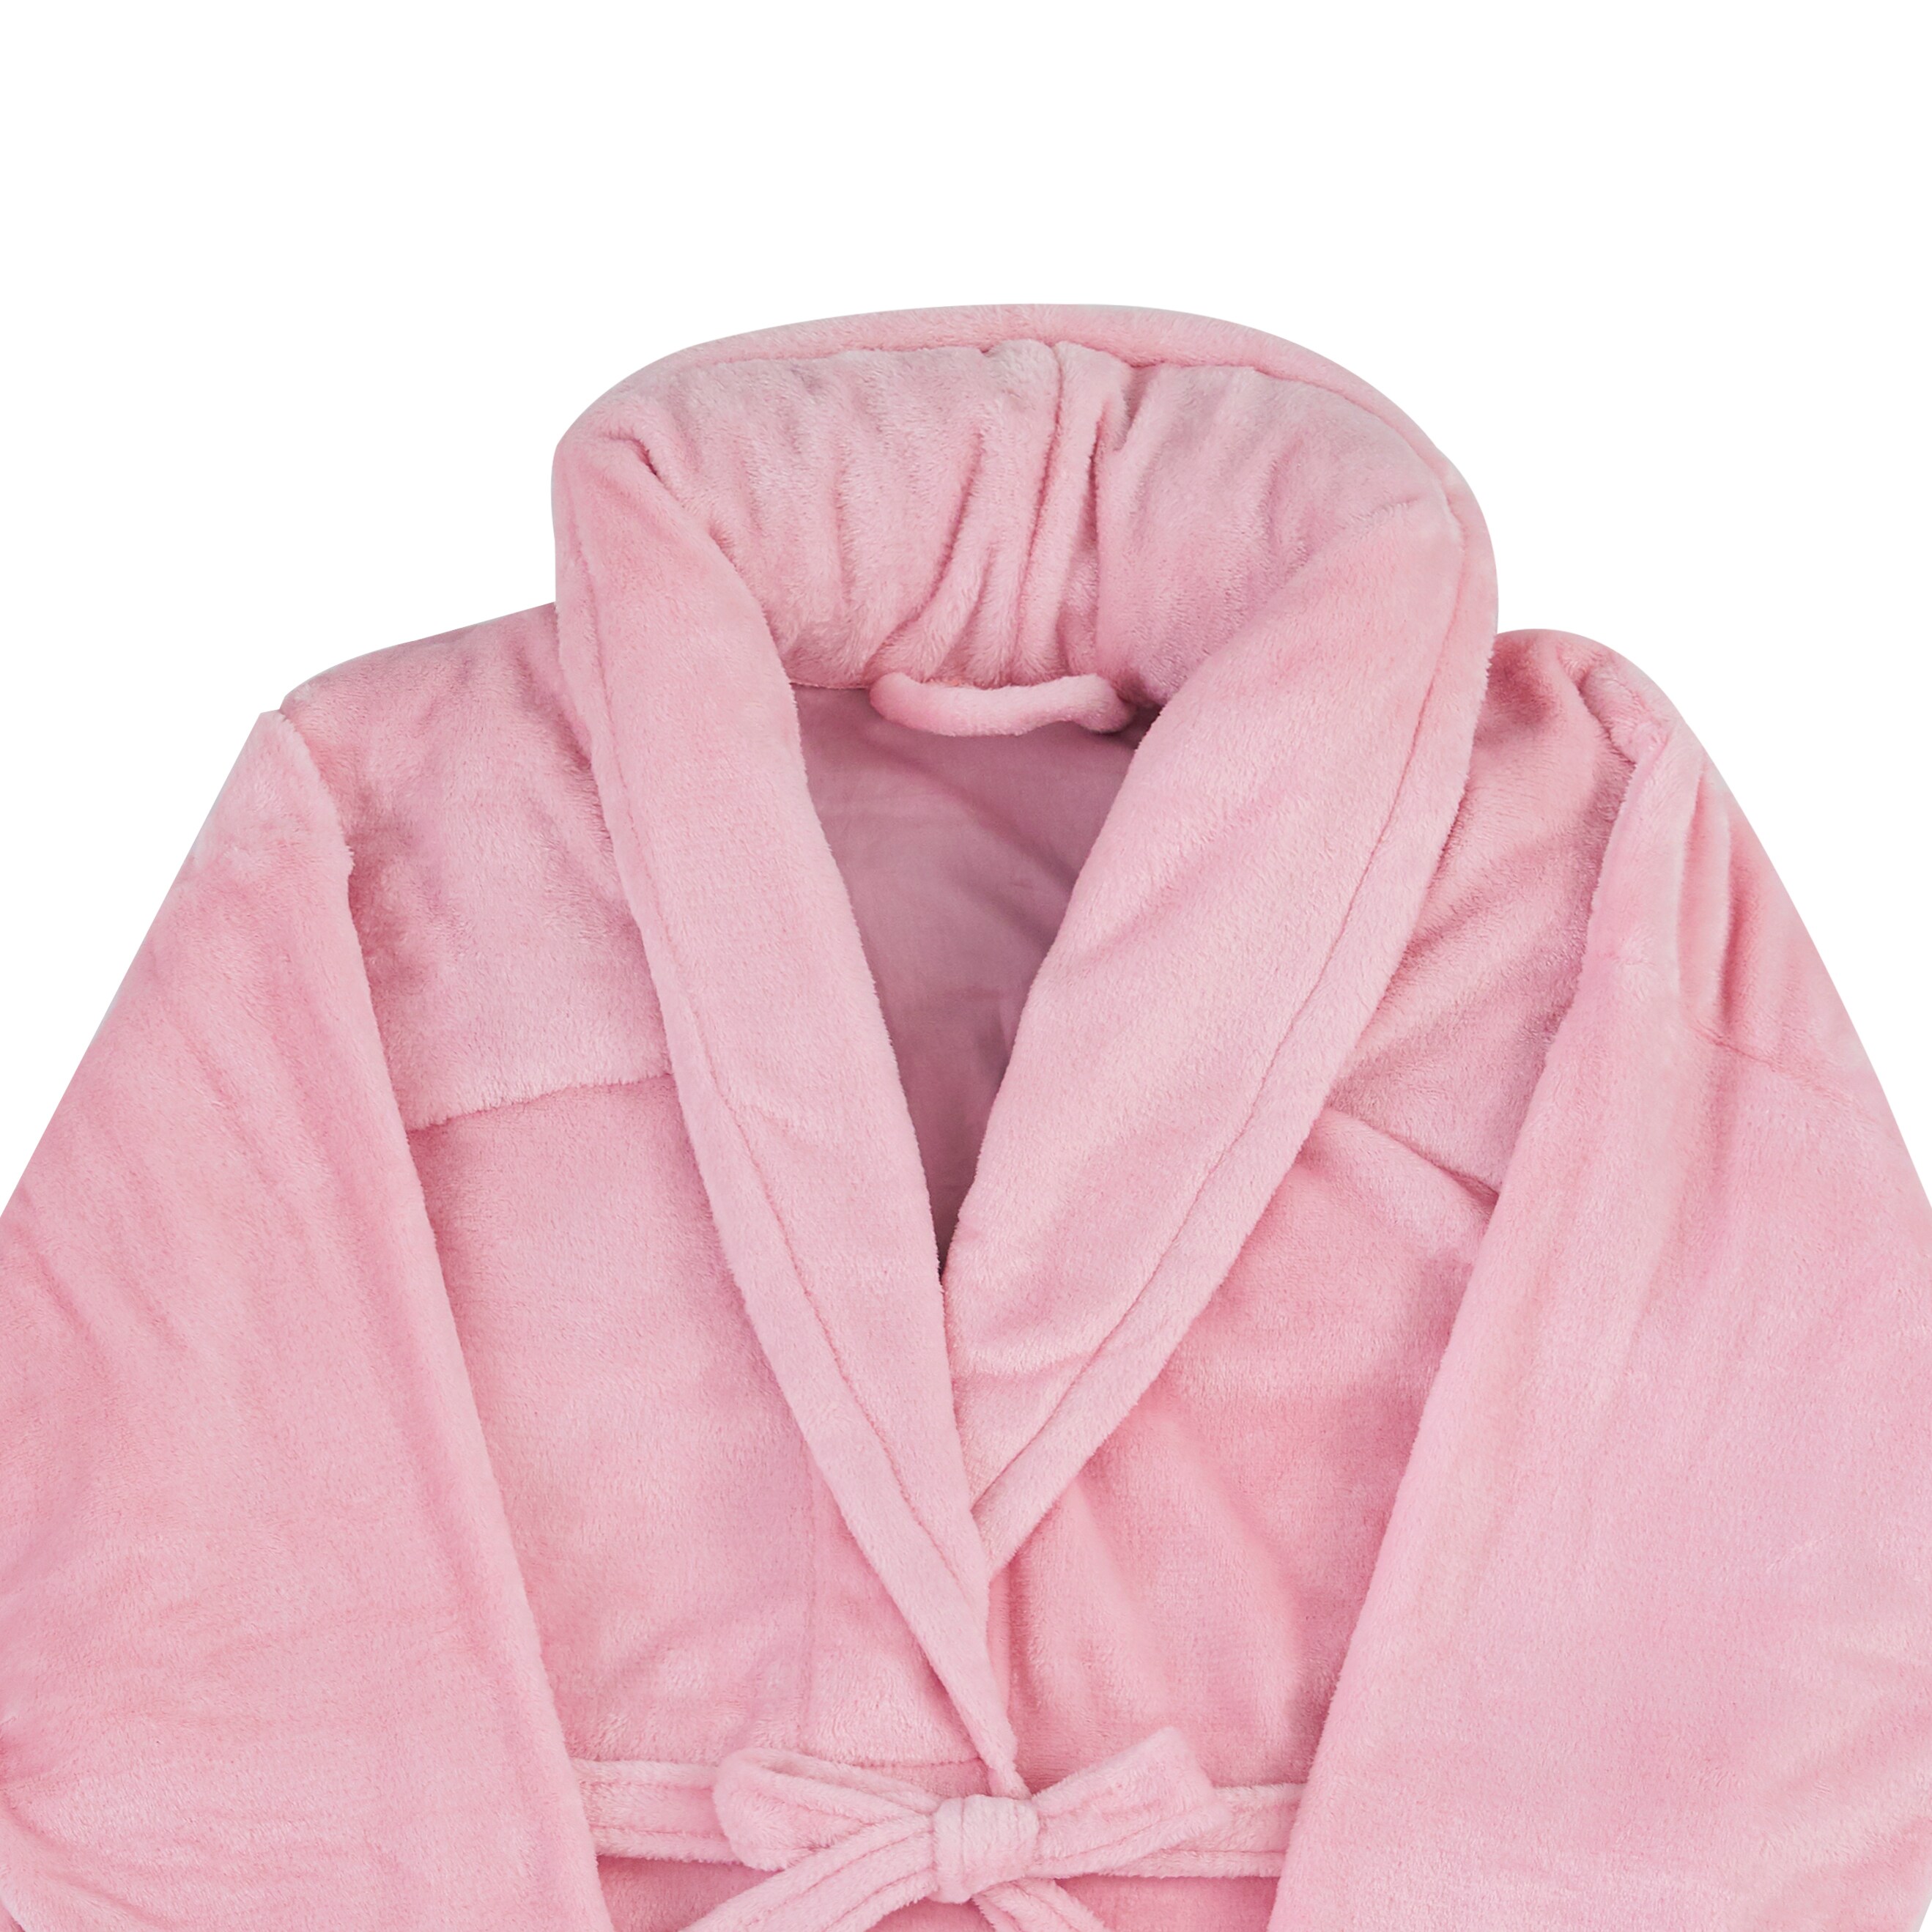 Wendunide Lingerie for Women Unisex Breathable Solid Color Bathrobe Splicing Home Clothes Robe Coat Hot Pink 3XL, Women's